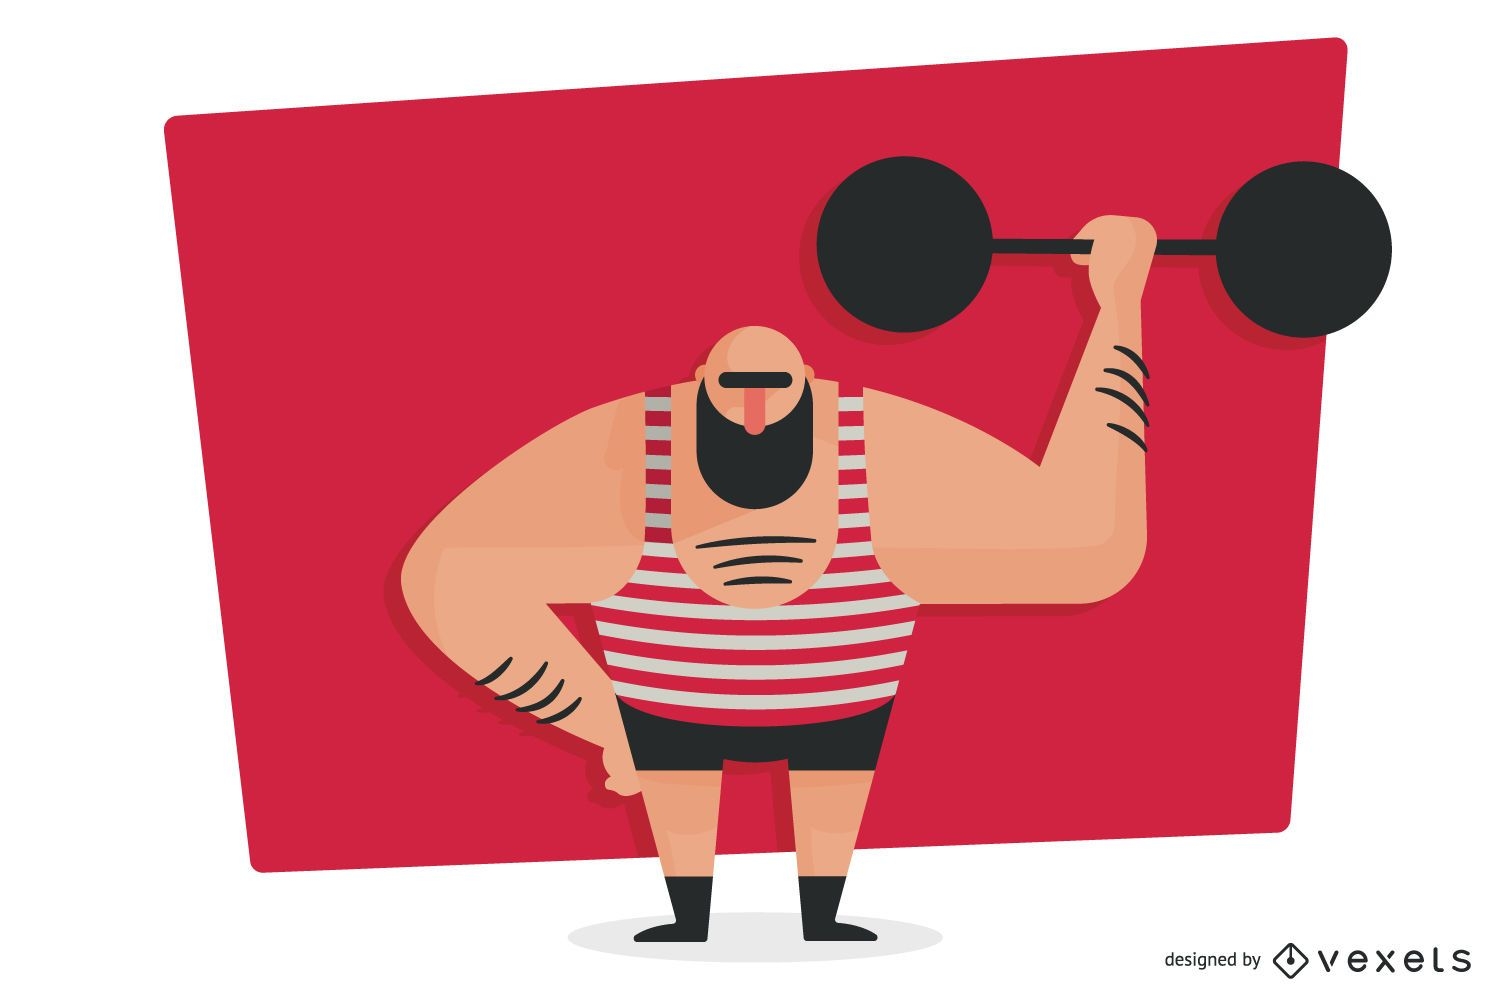 Weightlifter lifting barbell illustration